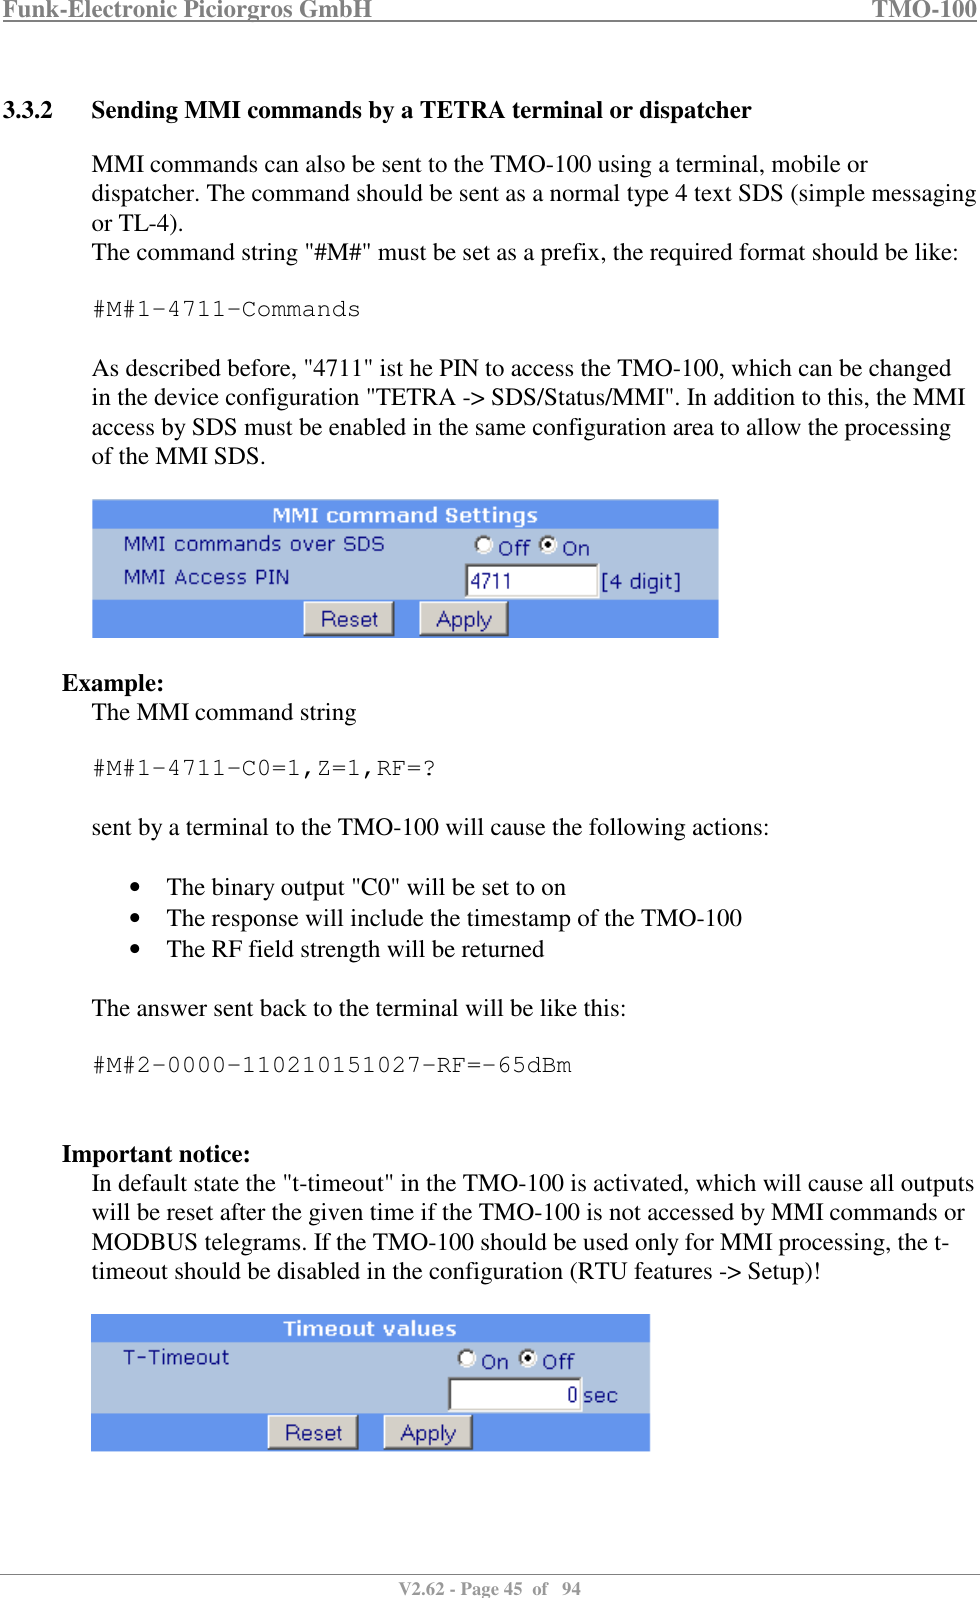 Funk-Electronic Piciorgros GmbH   TMO-100   V2.62 - Page 45  of   94   3.3.2 Sending MMI commands by a TETRA terminal or dispatcher MMI commands can also be sent to the TMO-100 using a terminal, mobile or dispatcher. The command should be sent as a normal type 4 text SDS (simple messaging or TL-4). The command string &quot;#M#&quot; must be set as a prefix, the required format should be like:  #M#1-4711-Commands  As described before, &quot;4711&quot; ist he PIN to access the TMO-100, which can be changed in the device configuration &quot;TETRA -&gt; SDS/Status/MMI&quot;. In addition to this, the MMI access by SDS must be enabled in the same configuration area to allow the processing of the MMI SDS.    Example: The MMI command string  #M#1-4711-C0=1,Z=1,RF=?  sent by a terminal to the TMO-100 will cause the following actions:   • The binary output &quot;C0&quot; will be set to on • The response will include the timestamp of the TMO-100 • The RF field strength will be returned  The answer sent back to the terminal will be like this:  #M#2-0000-110210151027-RF=-65dBm   Important notice: In default state the &quot;t-timeout&quot; in the TMO-100 is activated, which will cause all outputs will be reset after the given time if the TMO-100 is not accessed by MMI commands or MODBUS telegrams. If the TMO-100 should be used only for MMI processing, the t-timeout should be disabled in the configuration (RTU features -&gt; Setup)!   